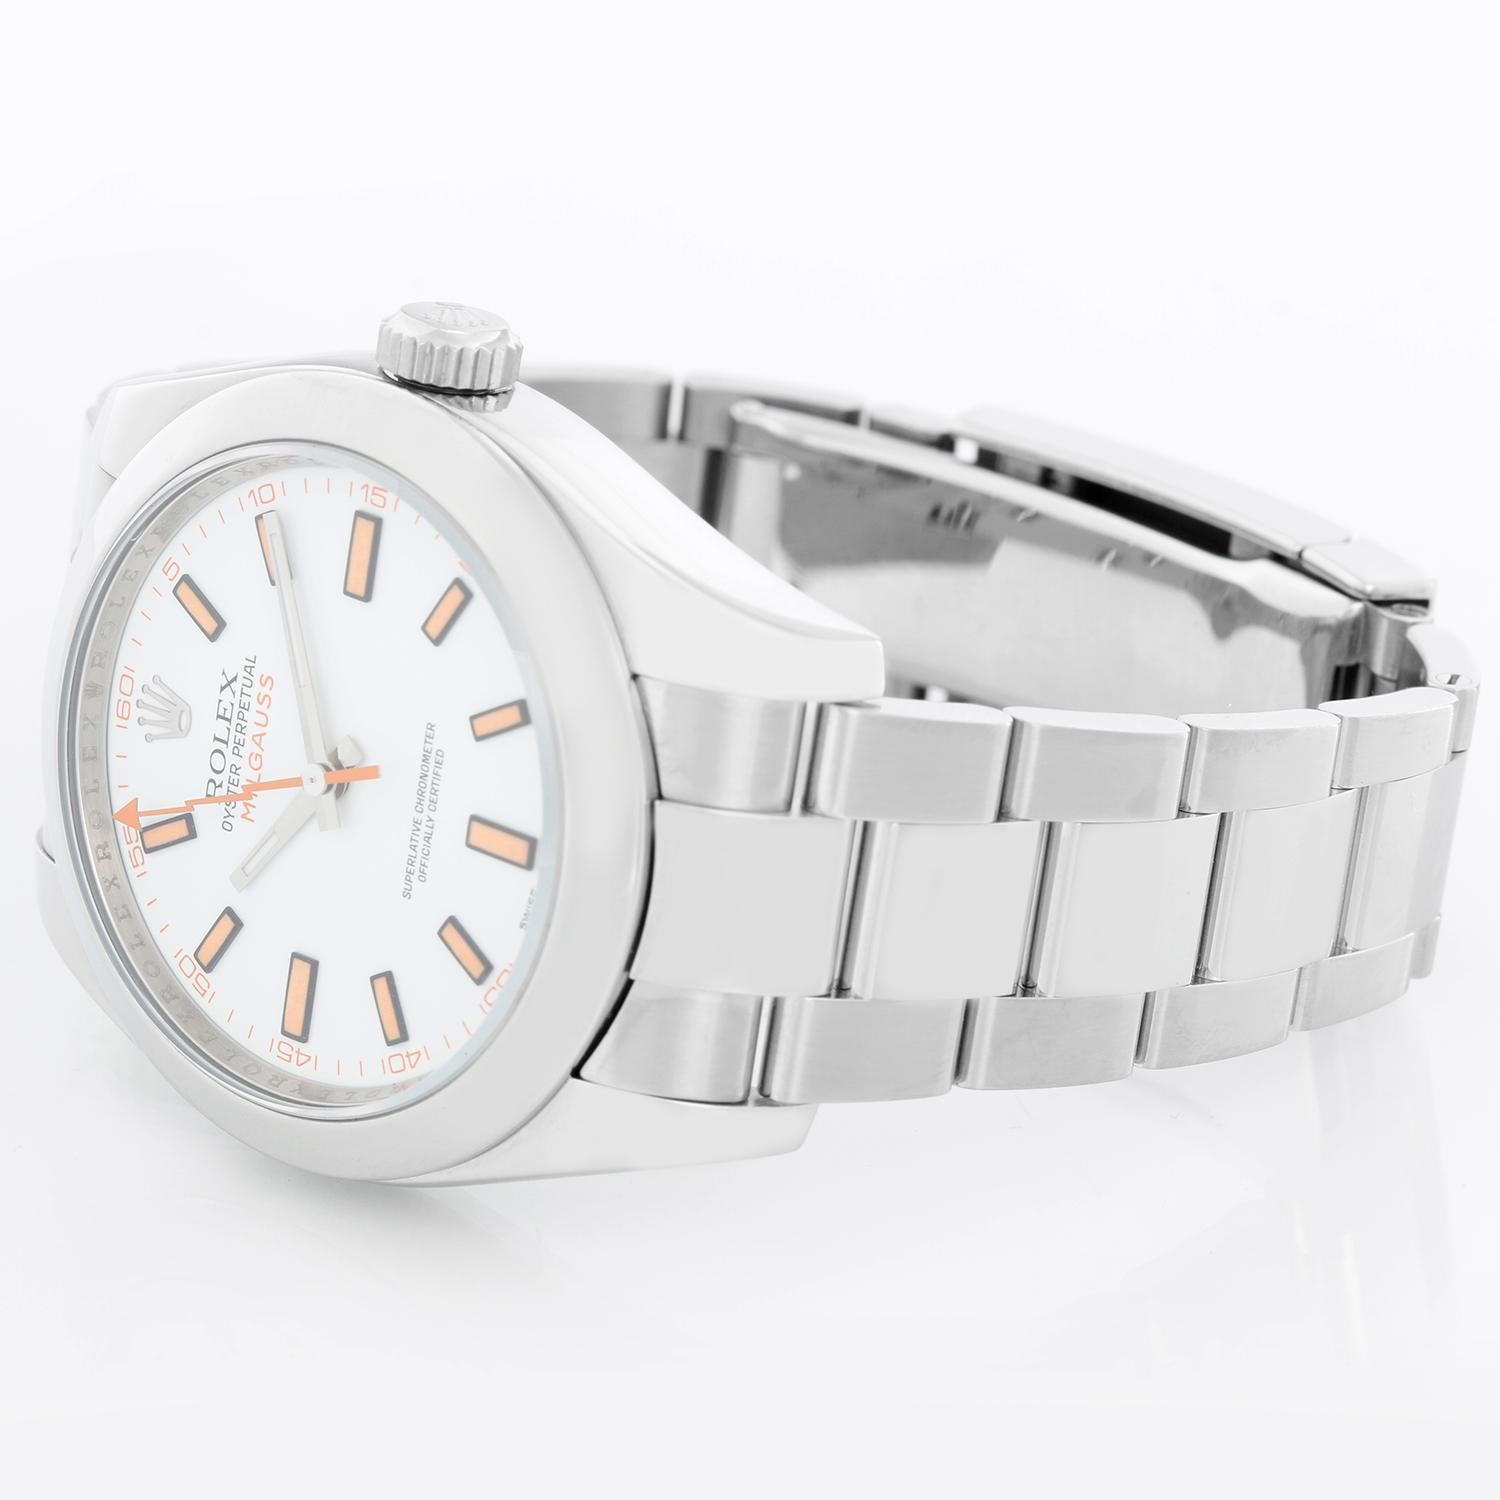 Rolex Milgauss Stainless Steel Men's Watch White Dial 116400 - Automatic winding, sapphire crystal, 31 jewels. Stainless steel case with smooth bezel (40mm diameter). White dial with luminous-style orange markers. Stainless steel Oyster bracelet